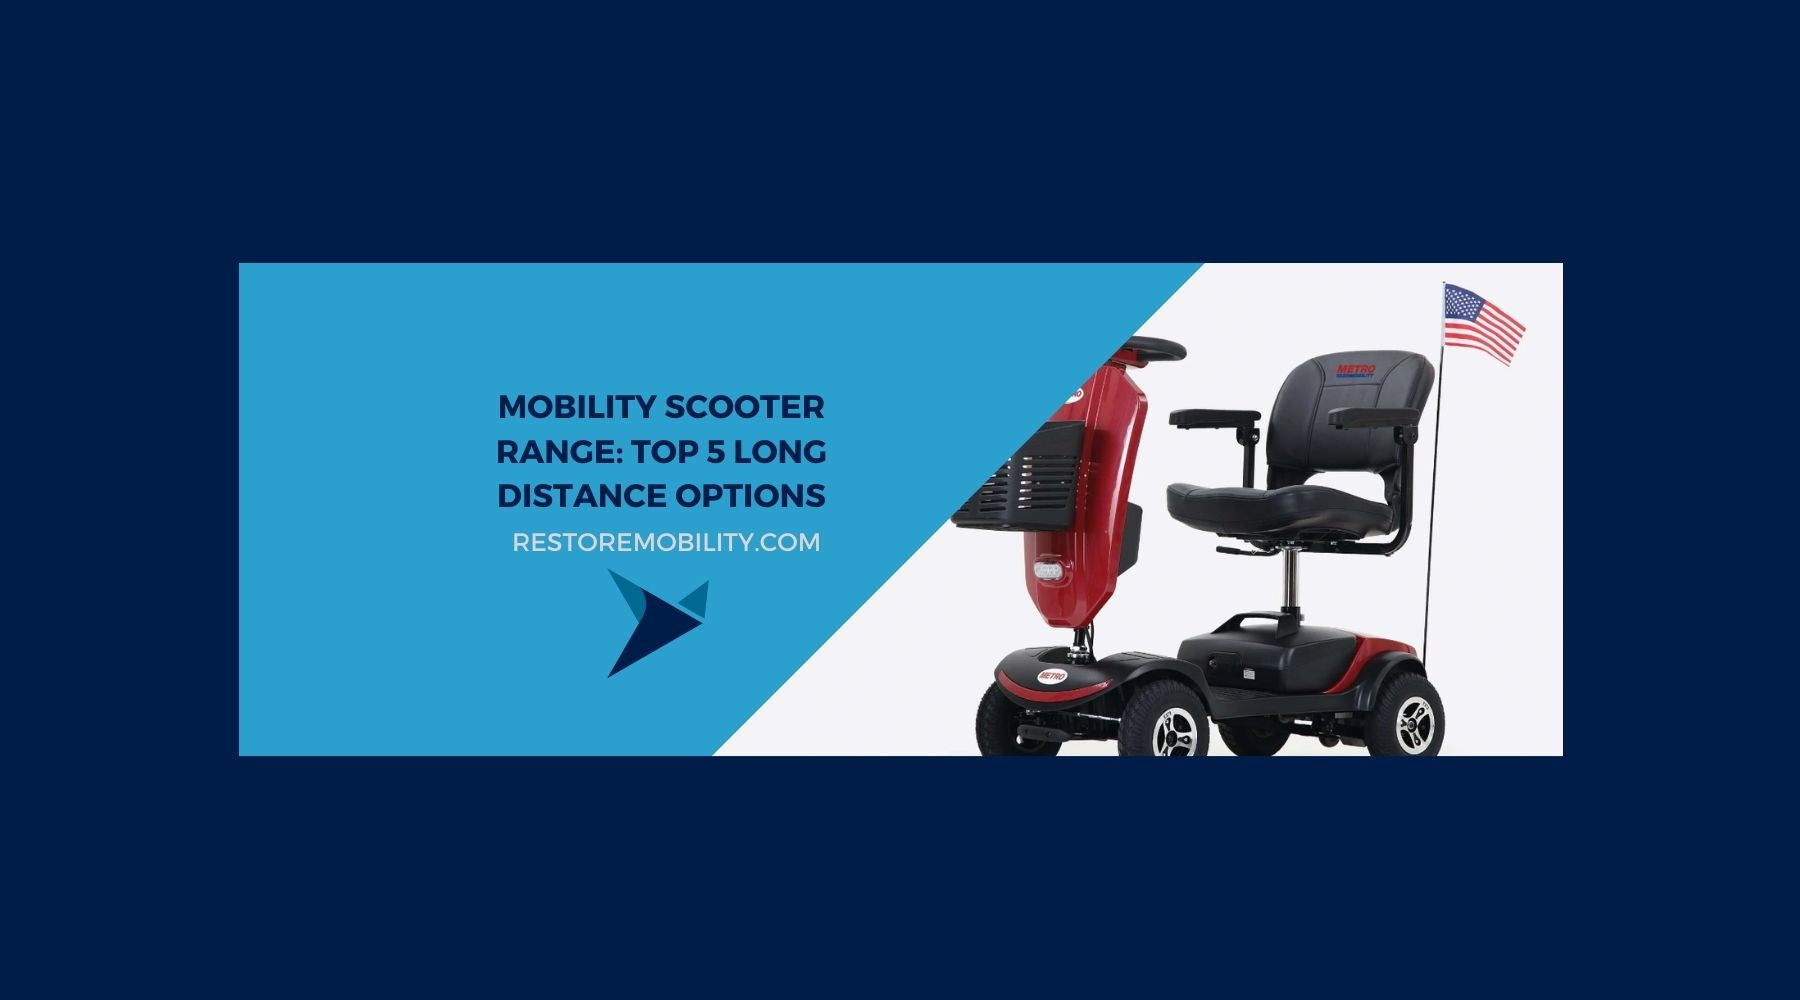 Mobility Scooter Range: Top 5 Long Distance Options